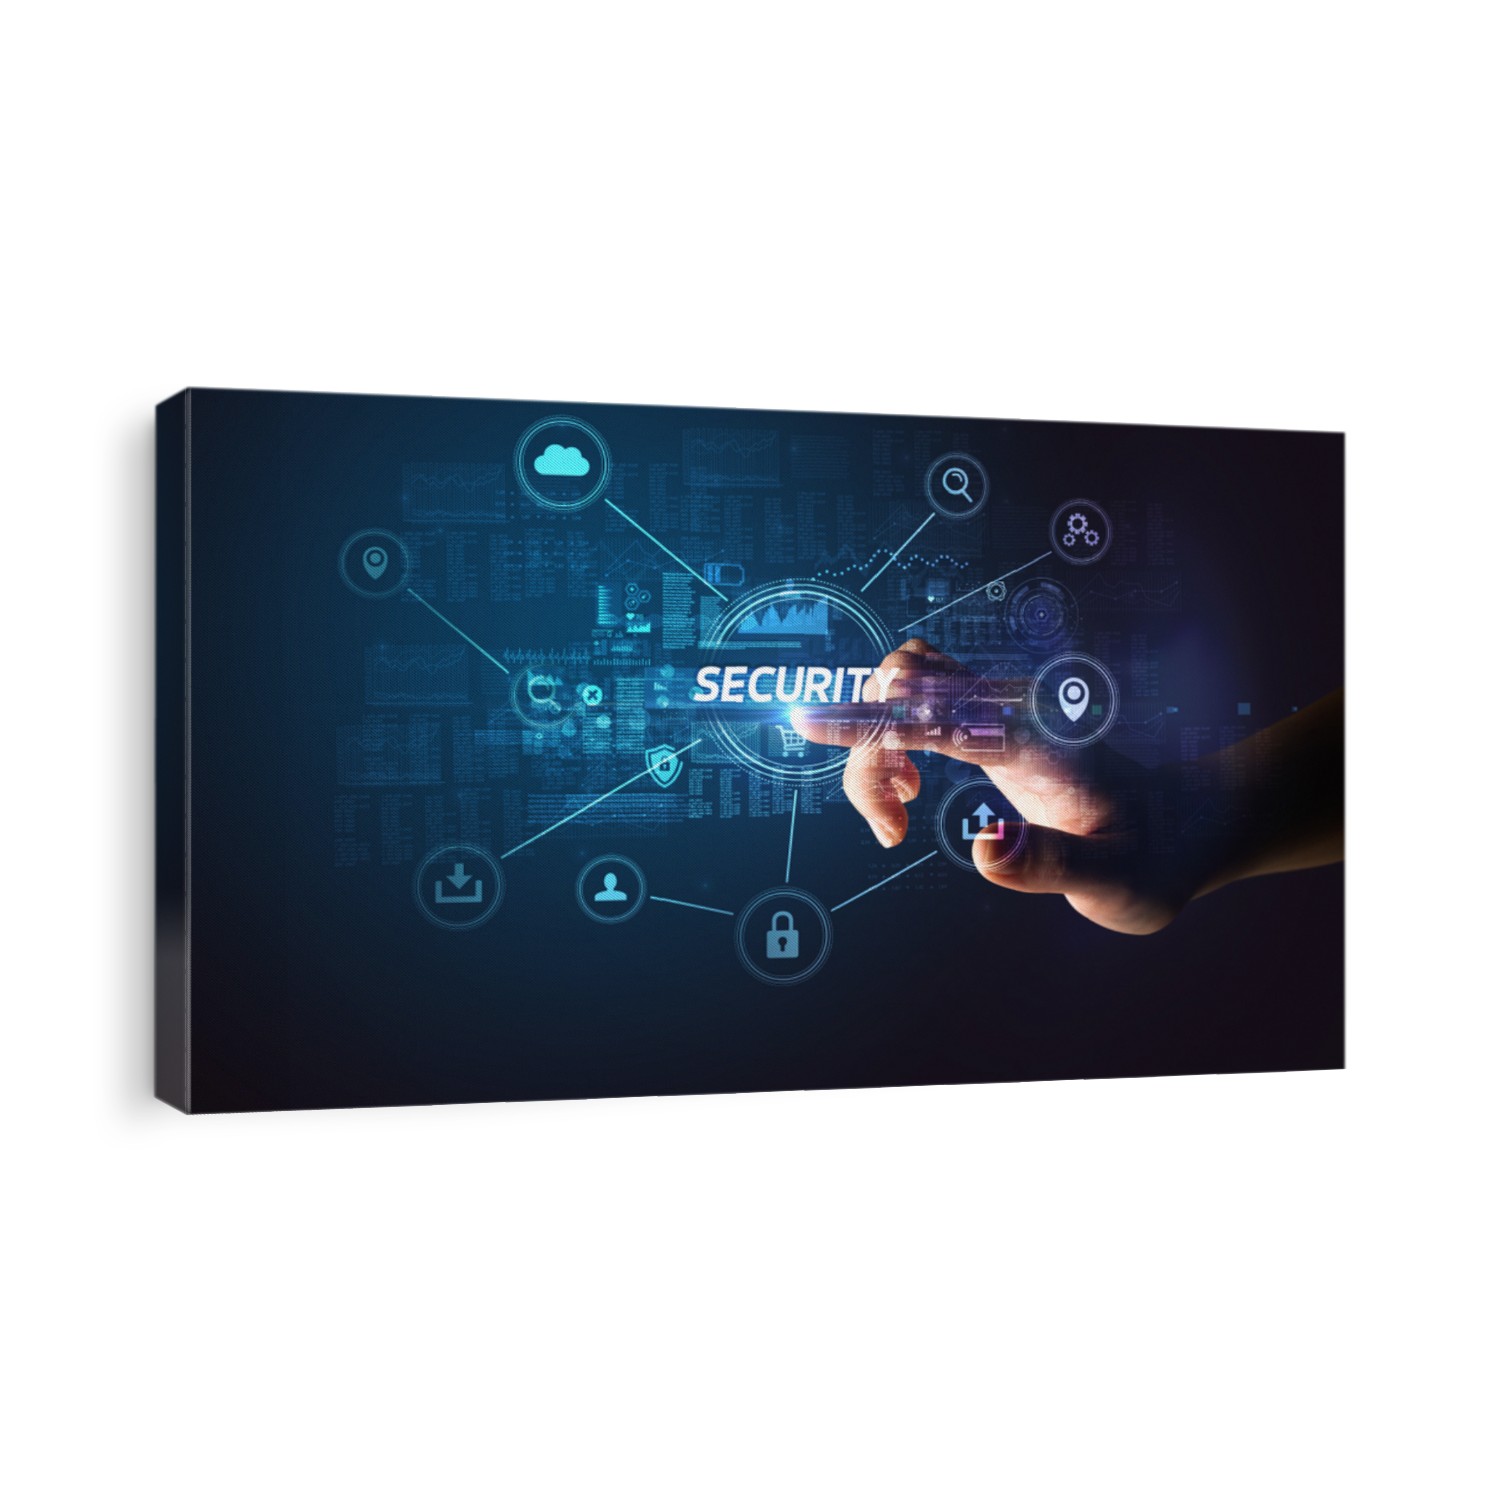 Hand touching SECURITY inscription, Cybersecurity concept